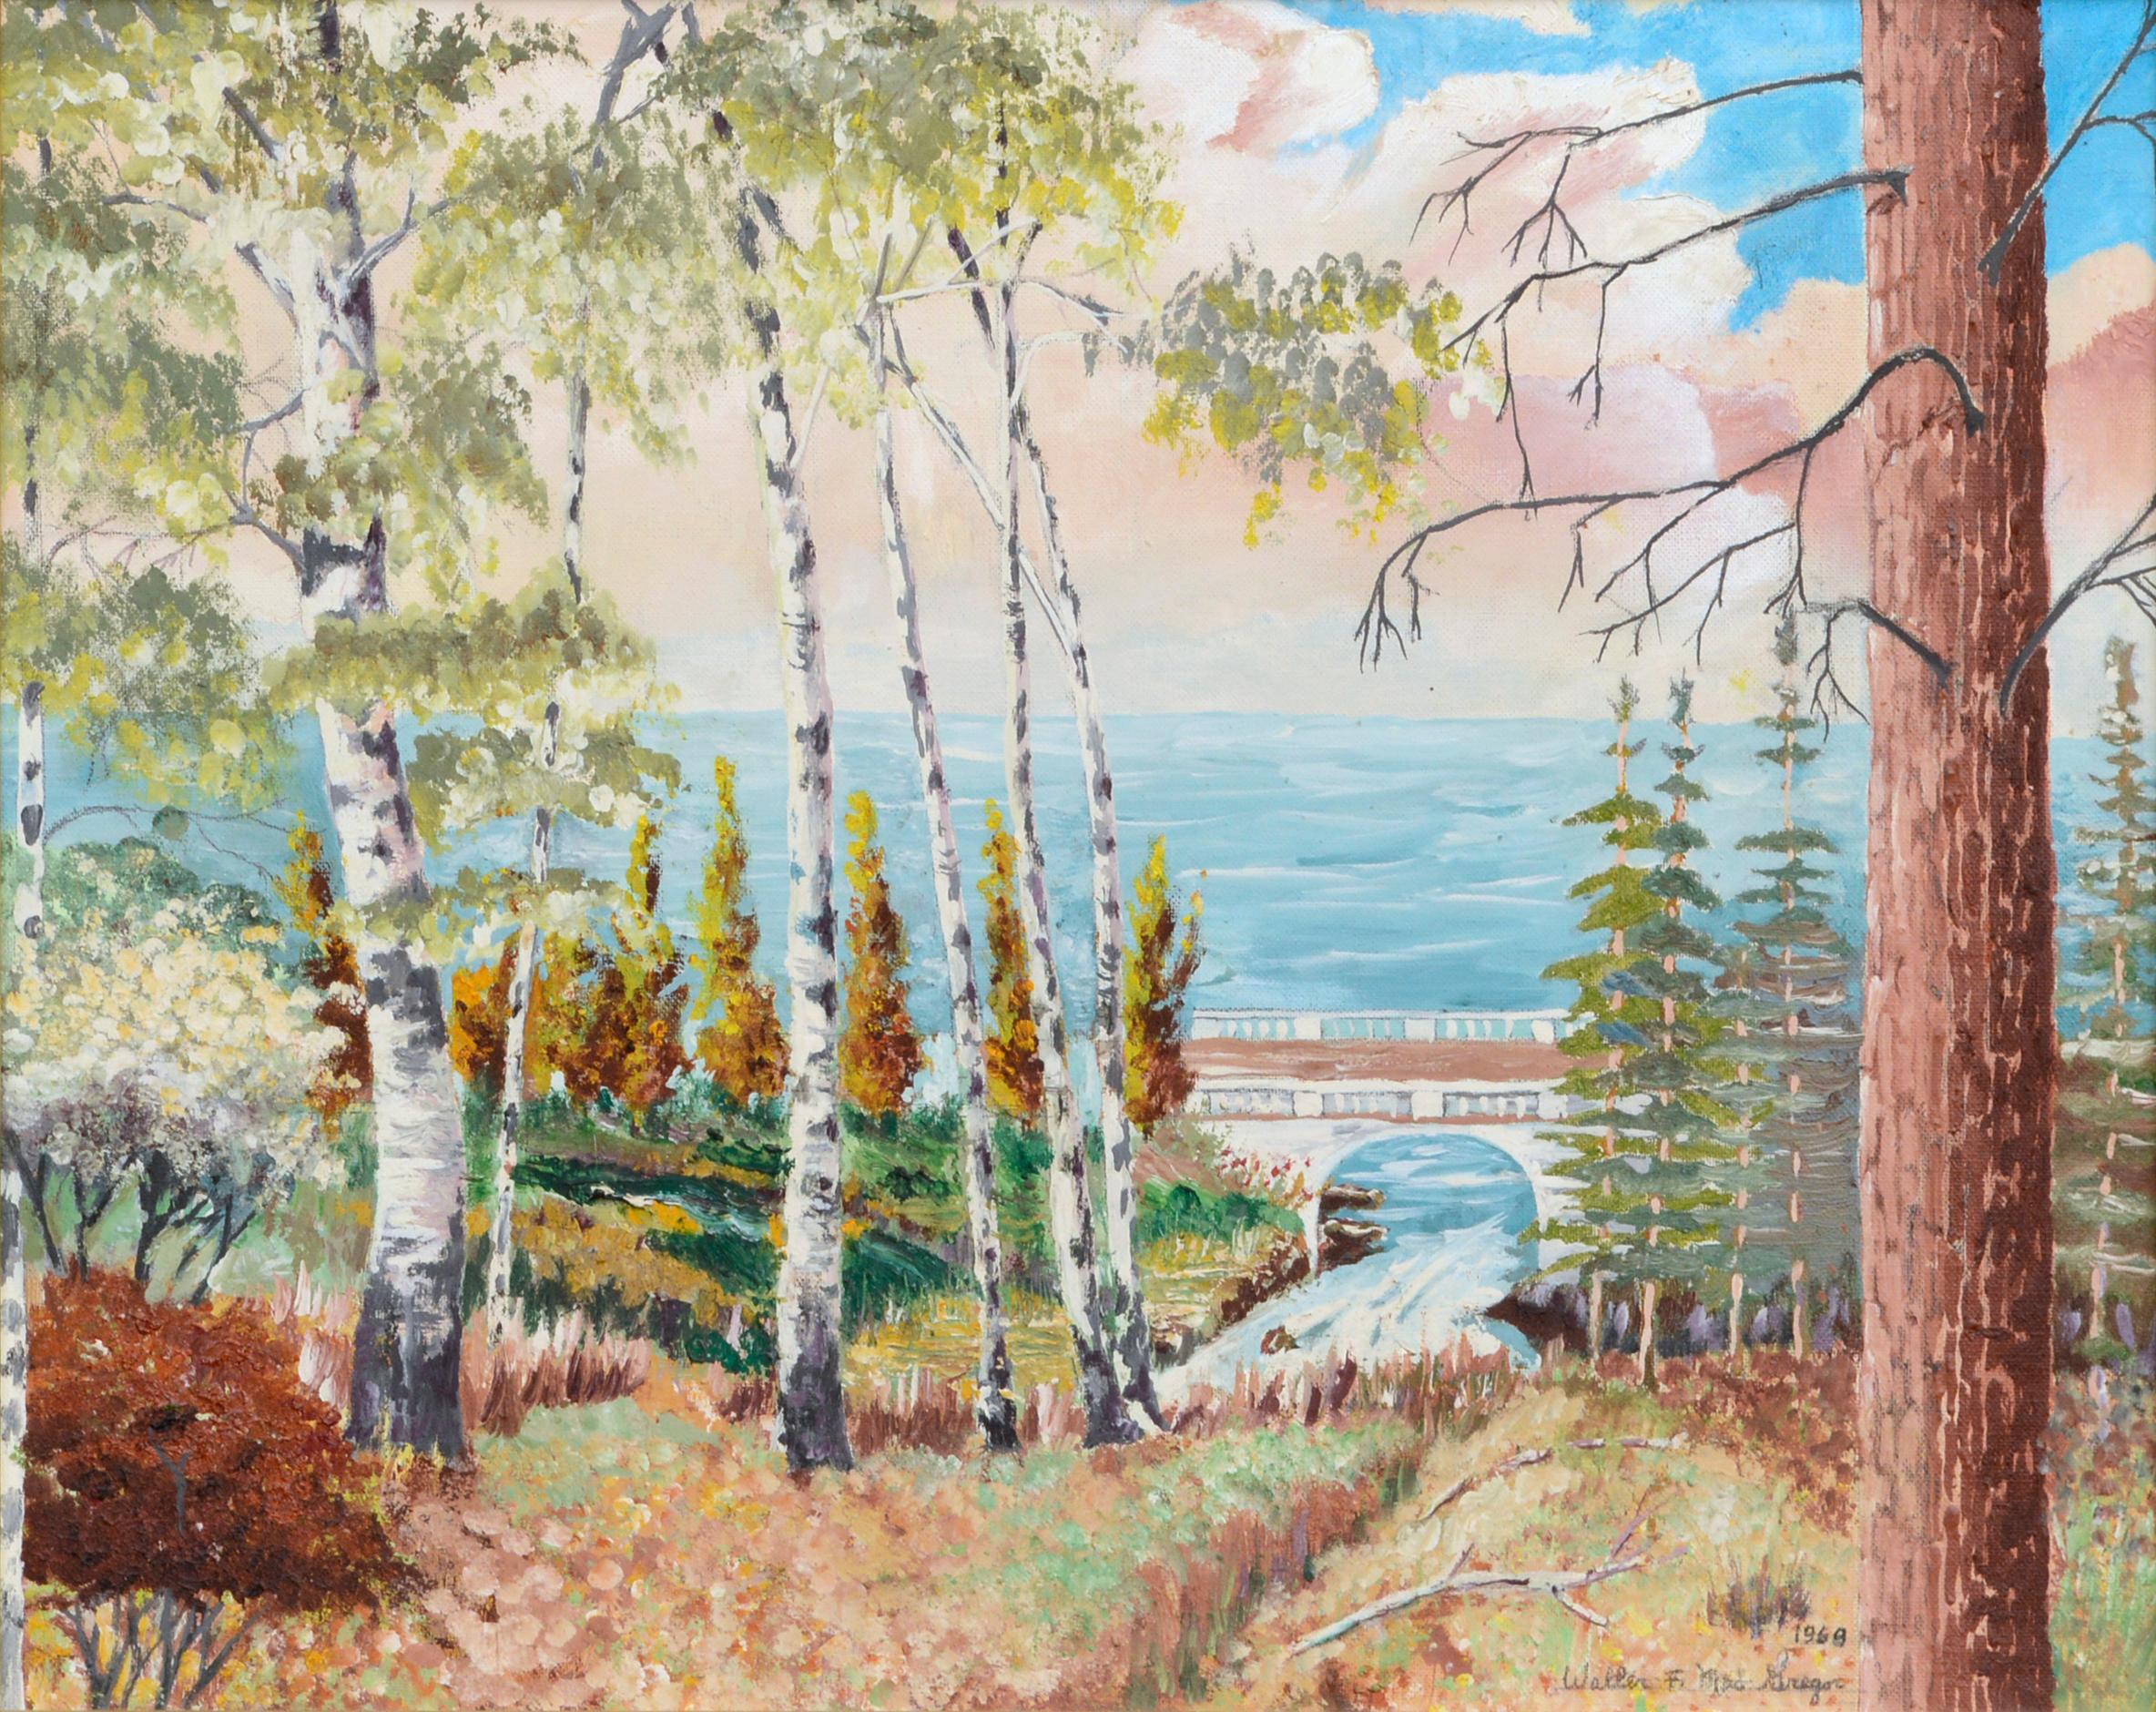 The Cascades Landscape in Oil on Artist's Board - Painting by Walter F. MacGregor